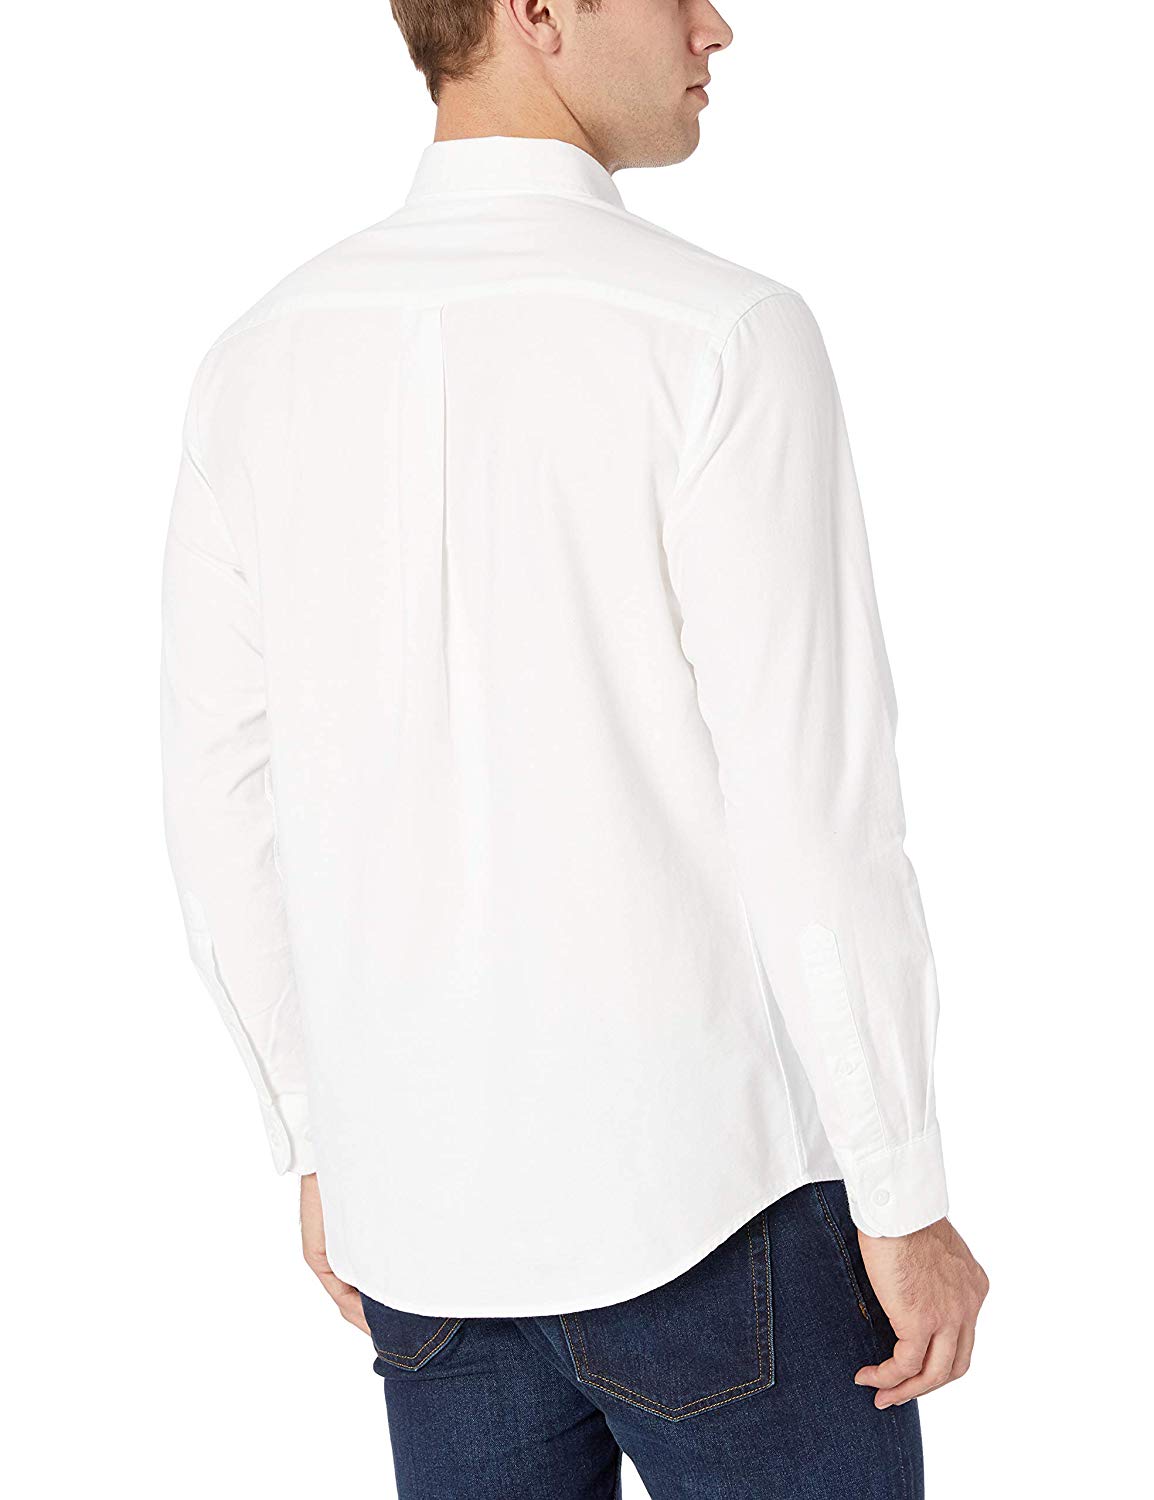 Essentials Men's Regular-Fit Long-Sleeve Solid, White, Size XX-Large ...